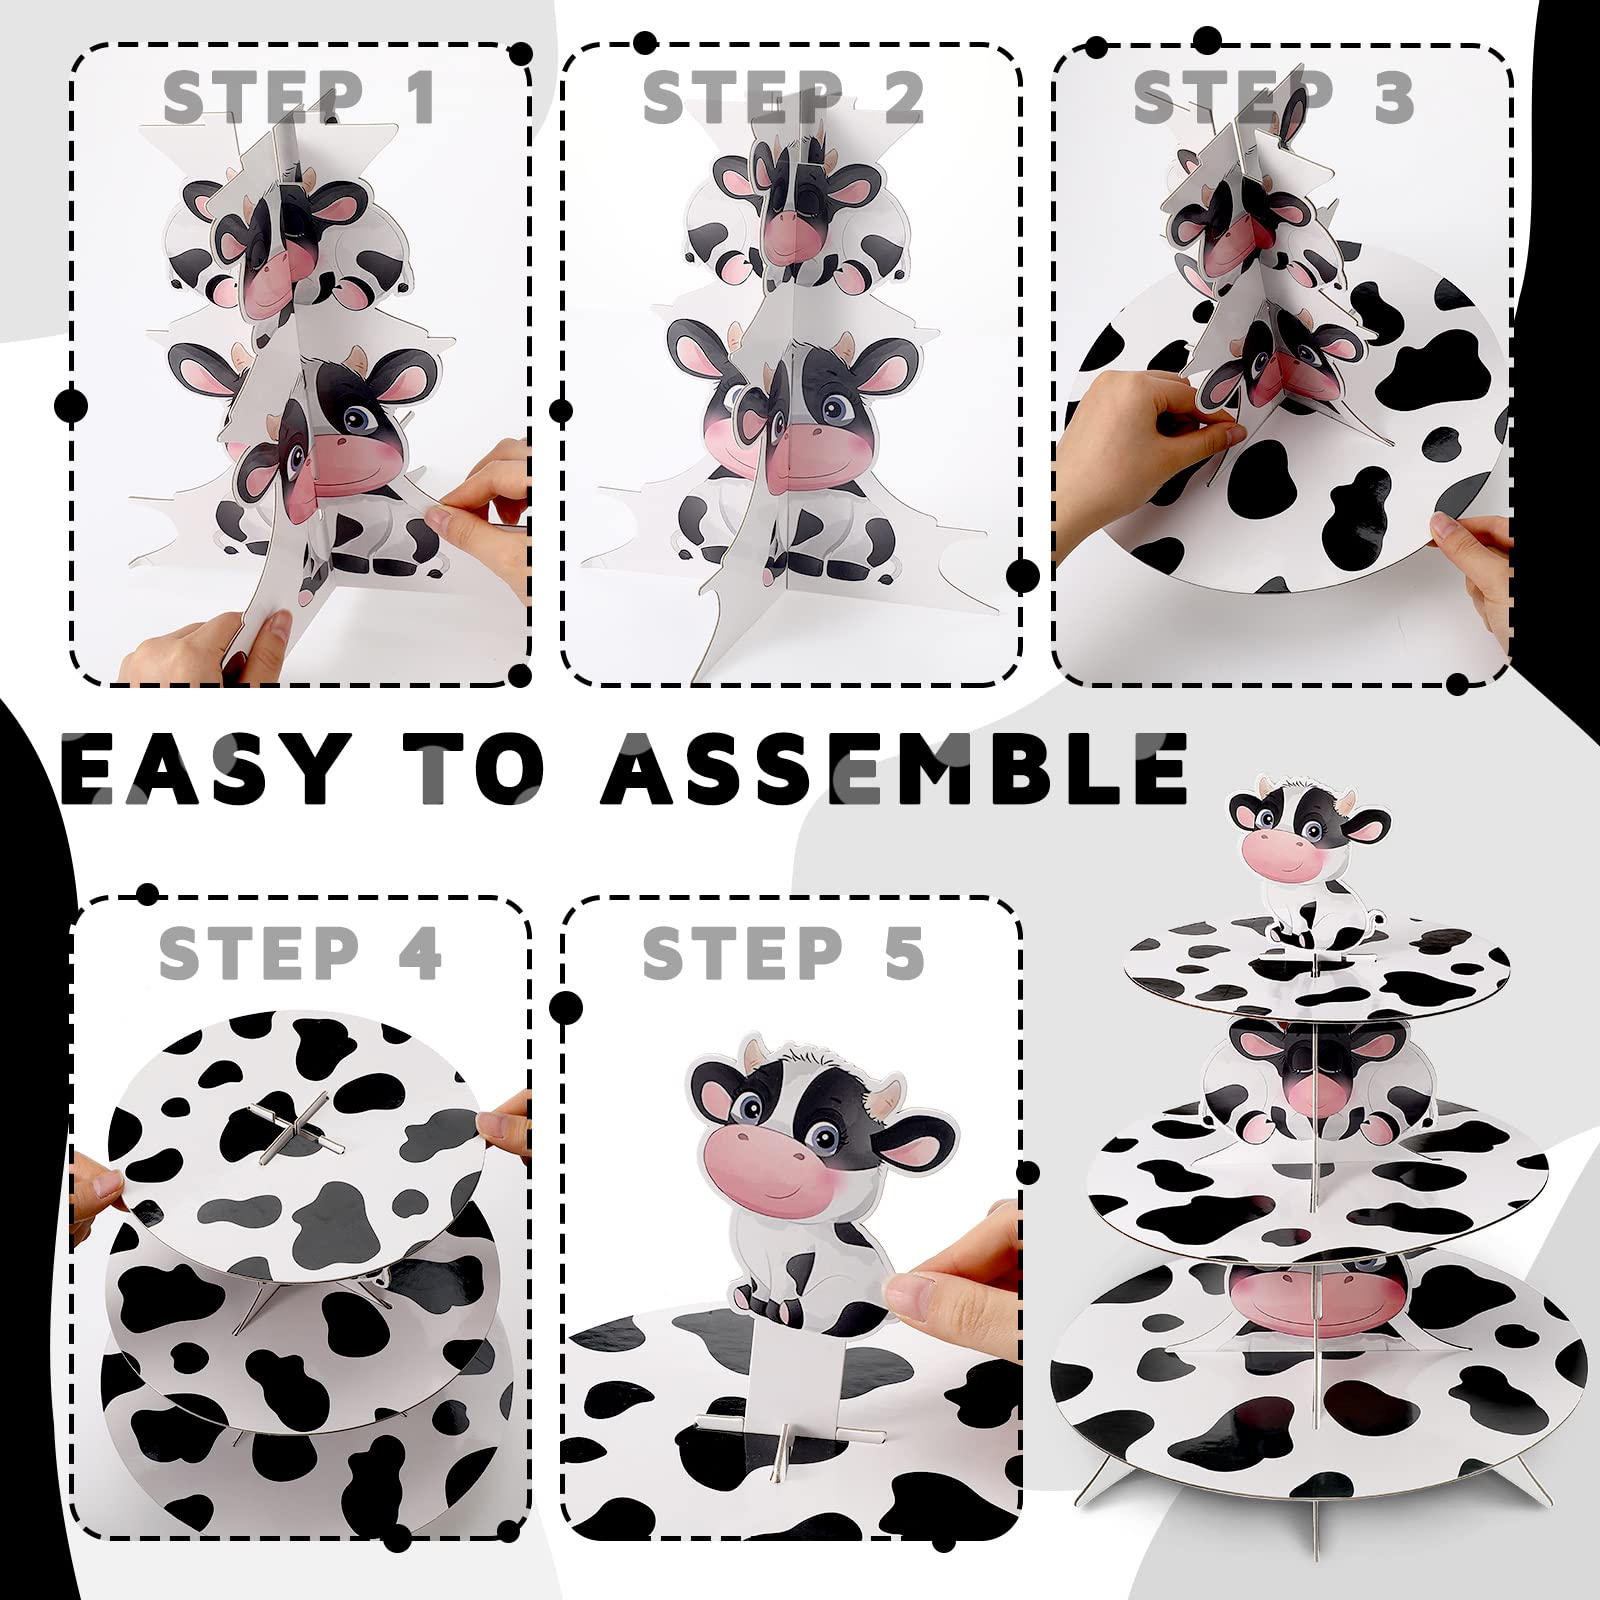 Farm Animal Cow Print Cupcake Stand Round Cardboard Cow Themed 3 Tier Cupcake Holder Cow Print Party Supplies Cow Party Decorations for 24 Cupcakes Baby Shower Cake Cowgirl Cowboy Decor